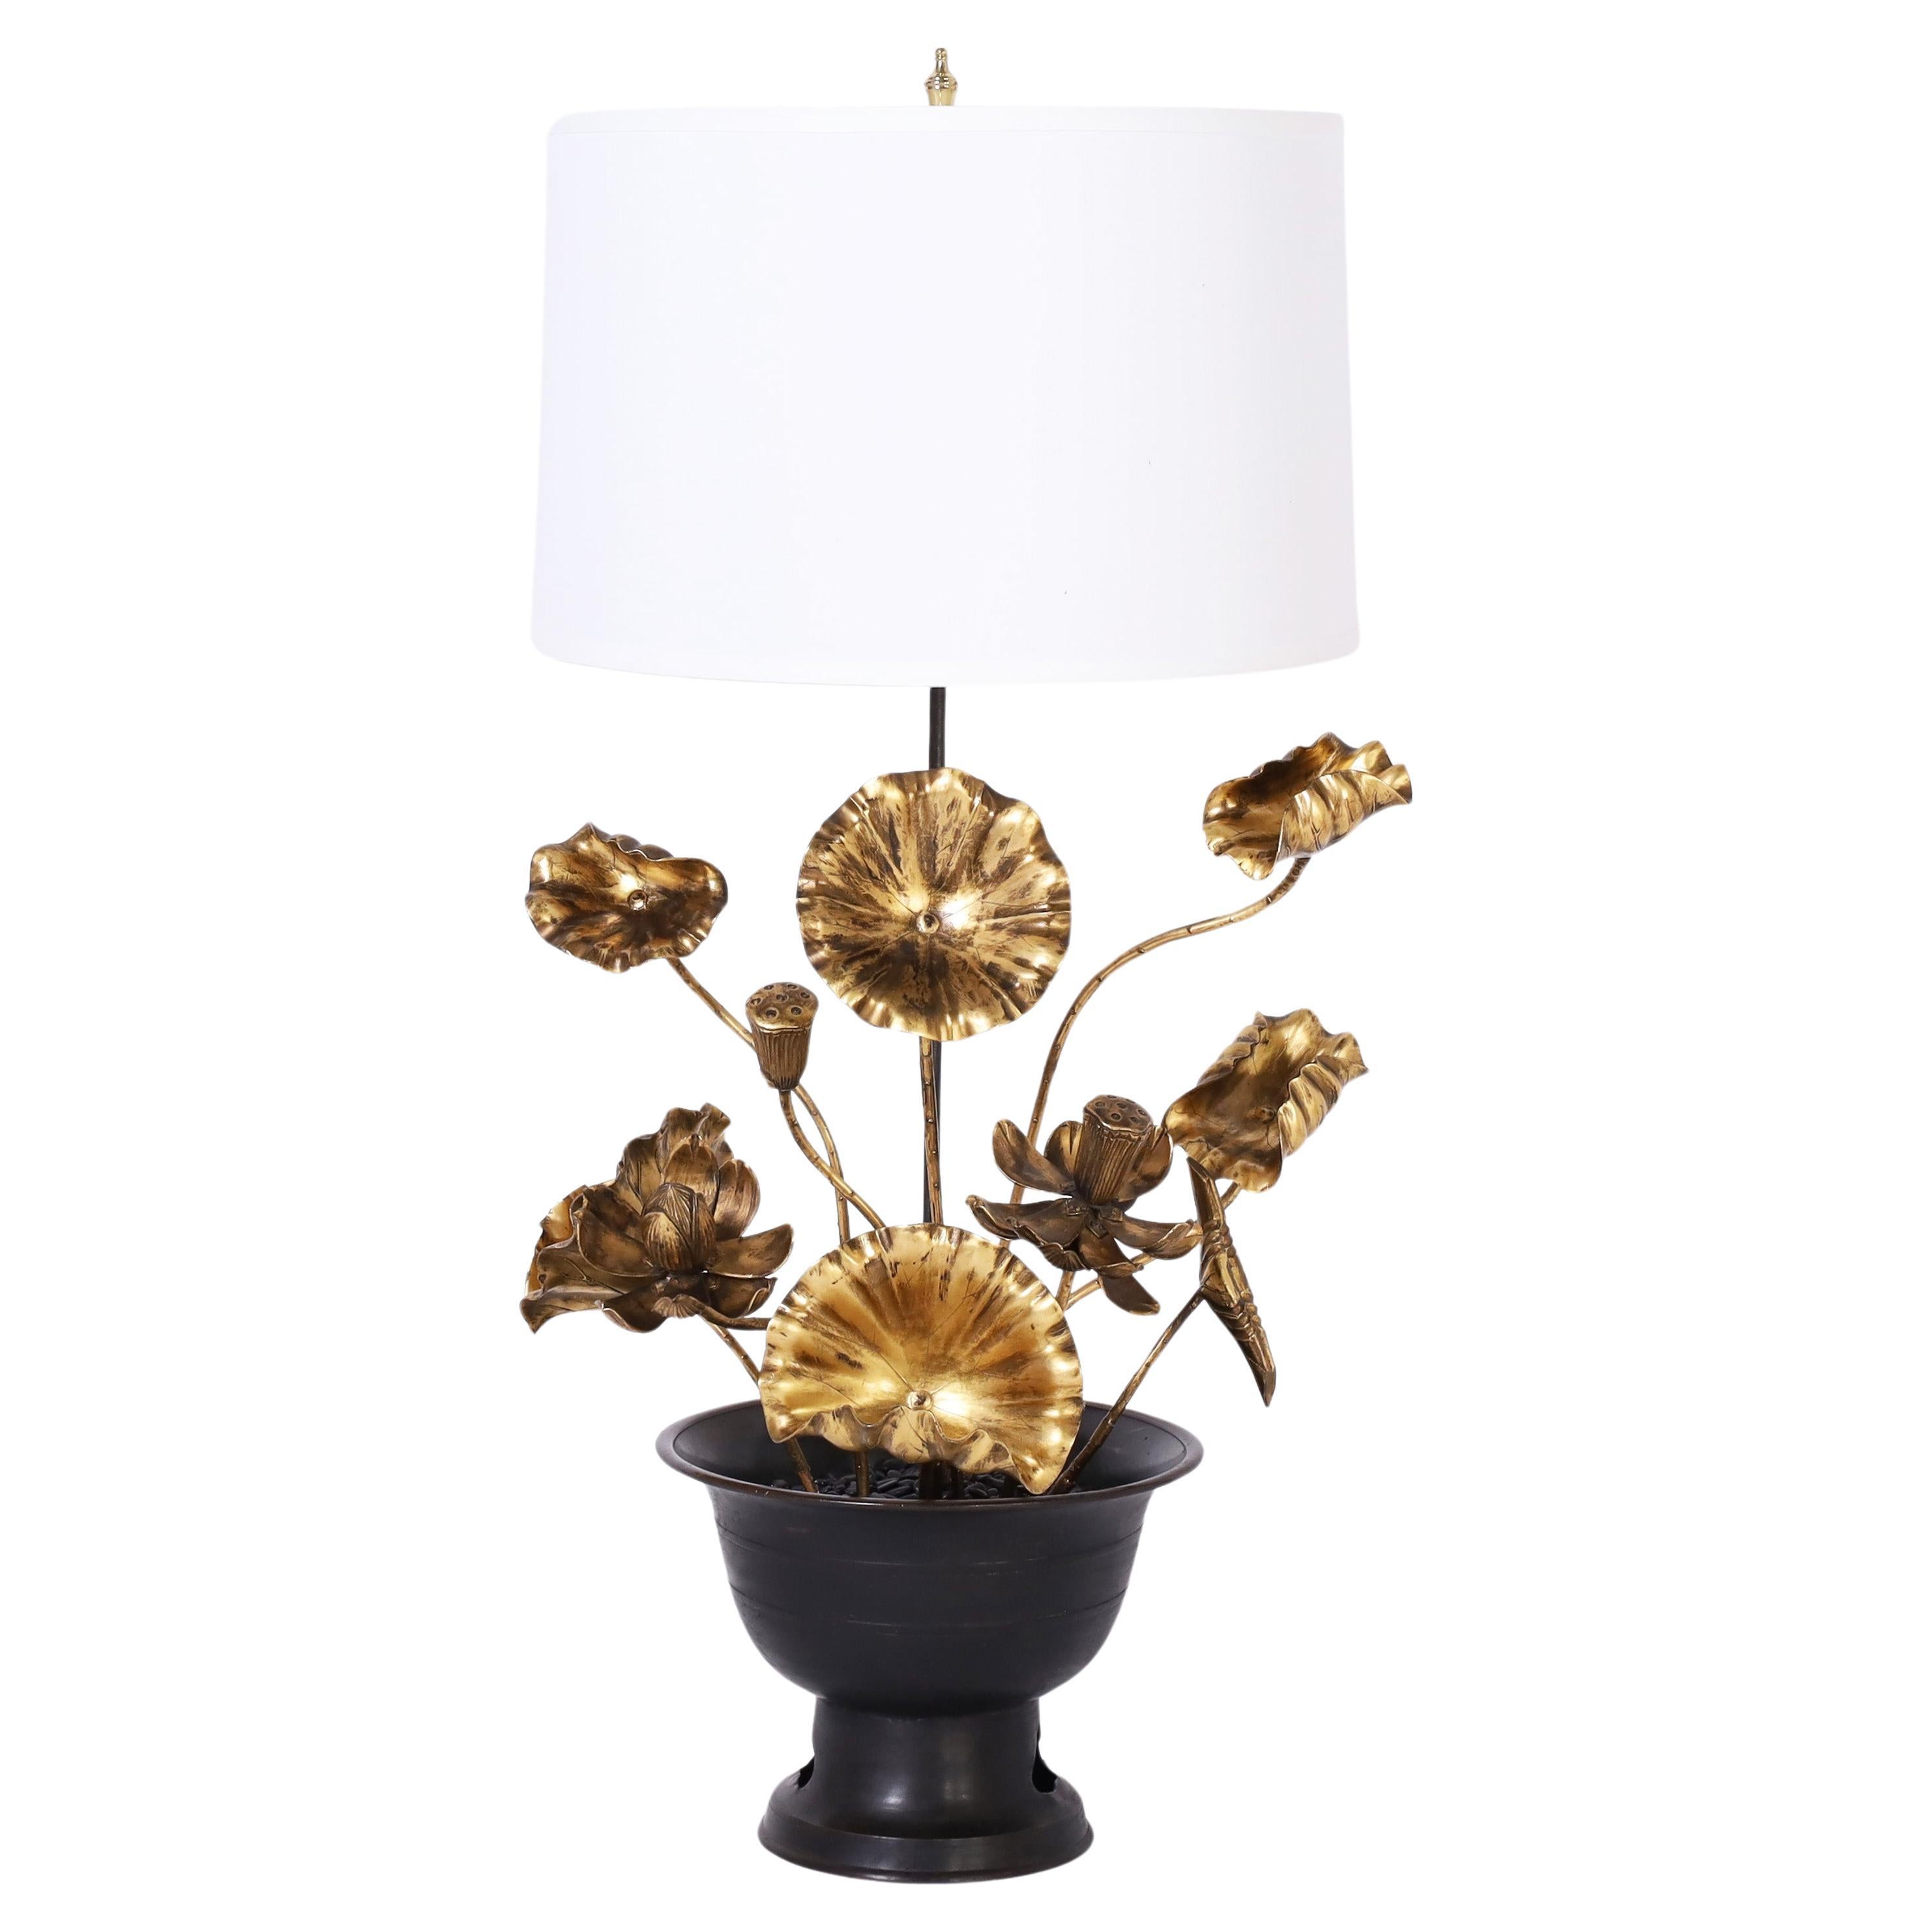 Japanese Lotus Flower Table Lamp For Sale